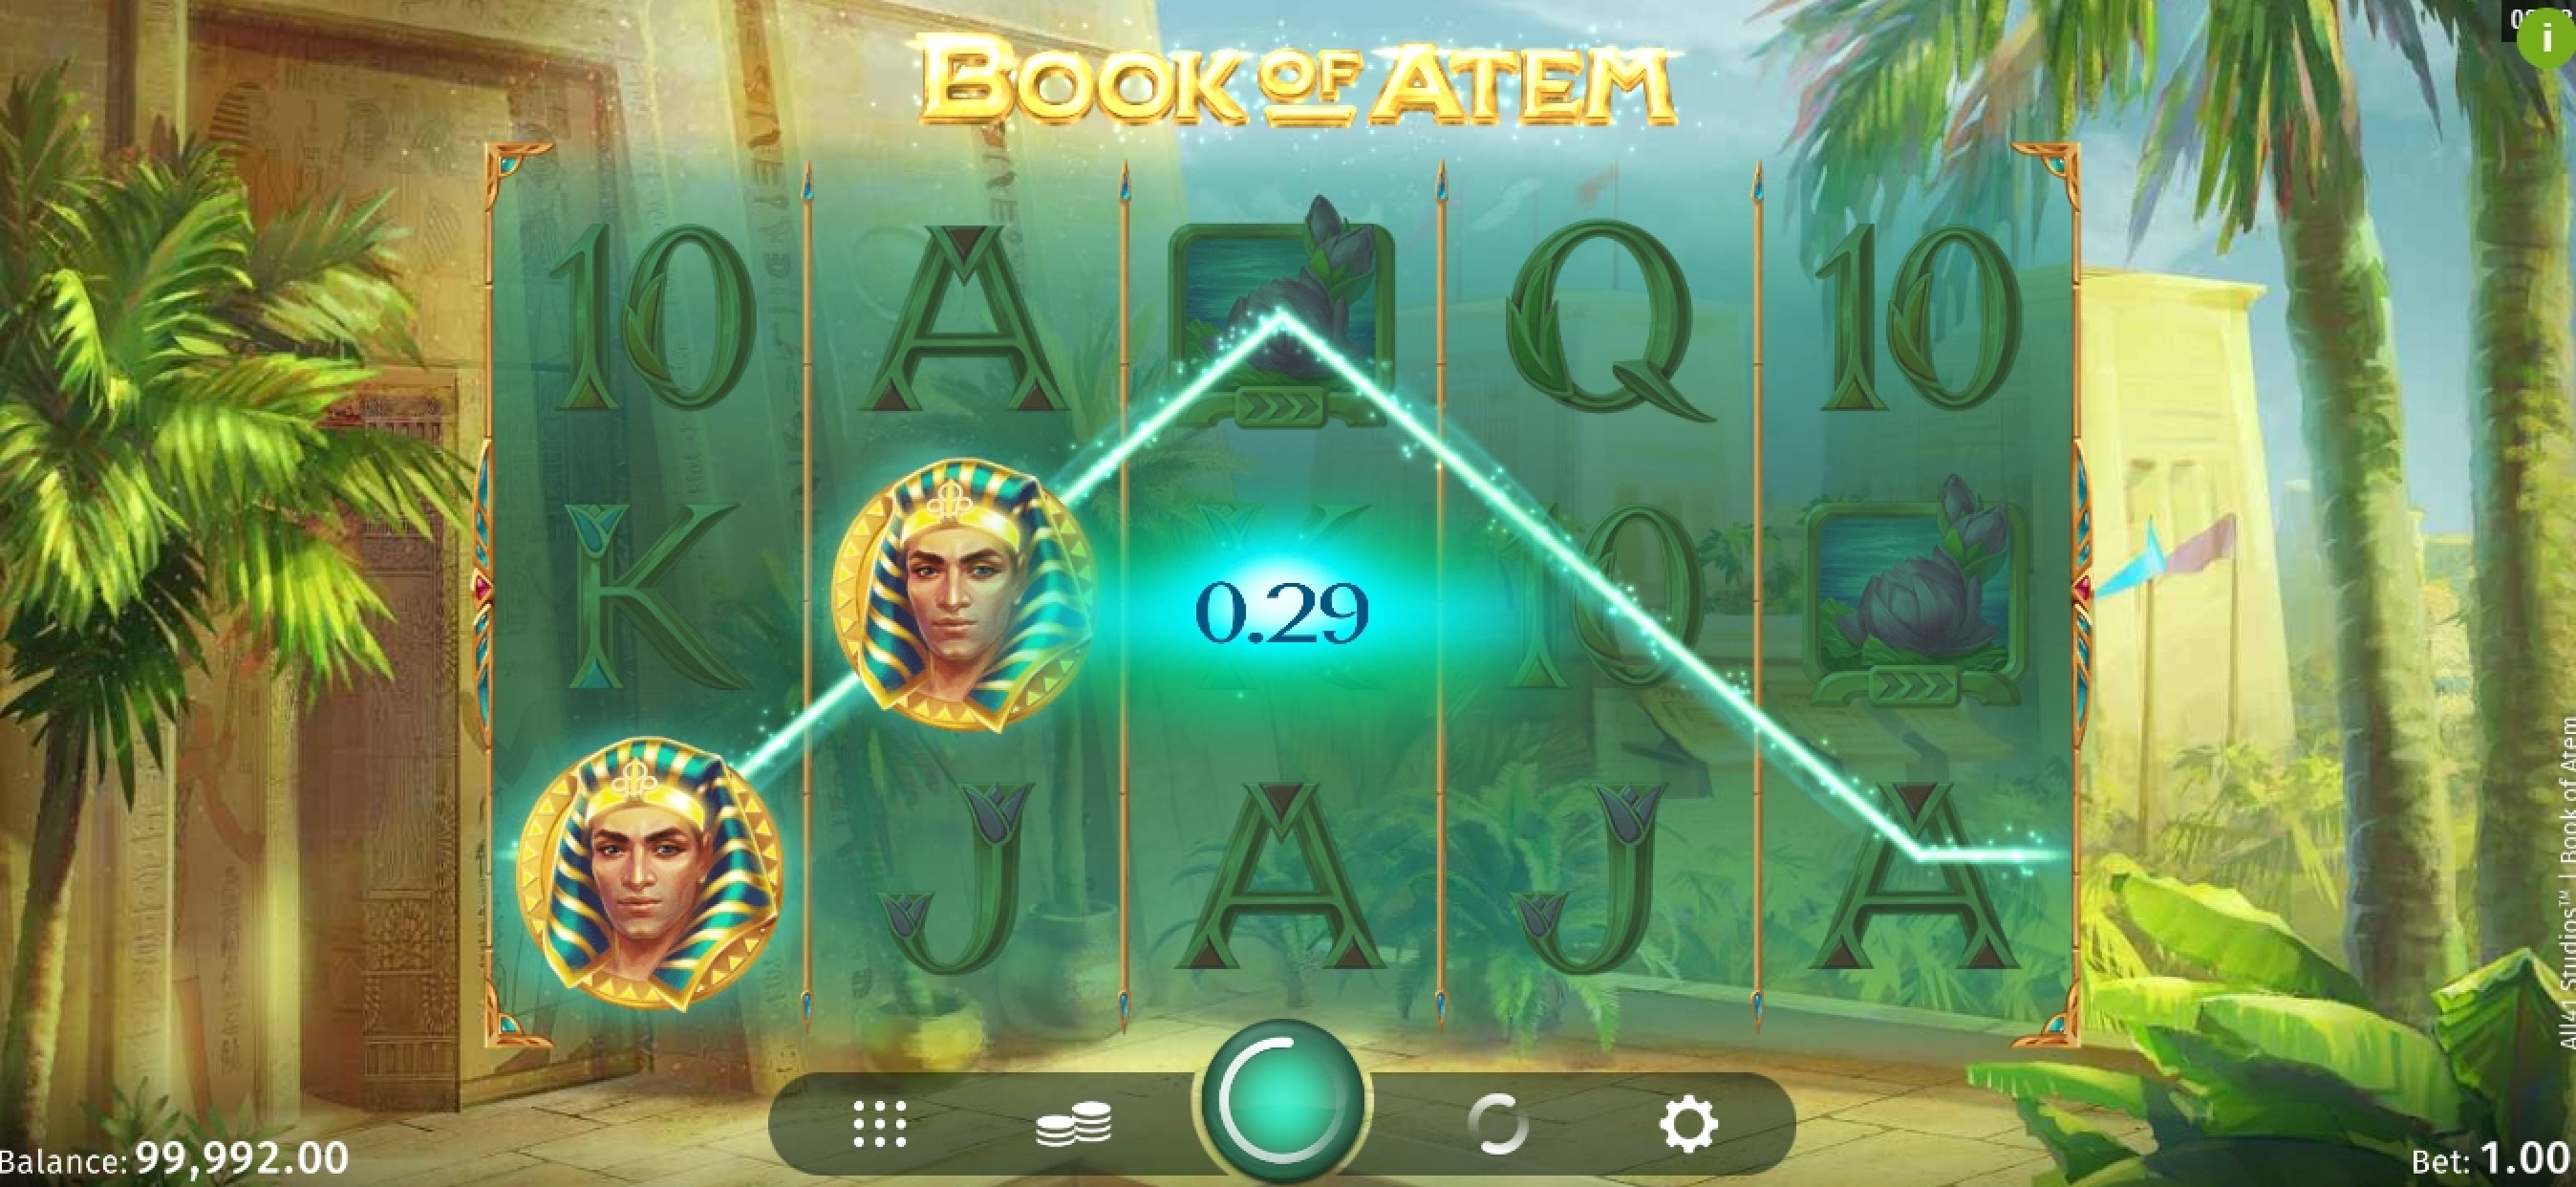 Win Money in Book of Atem Free Slot Game by All41 Studios